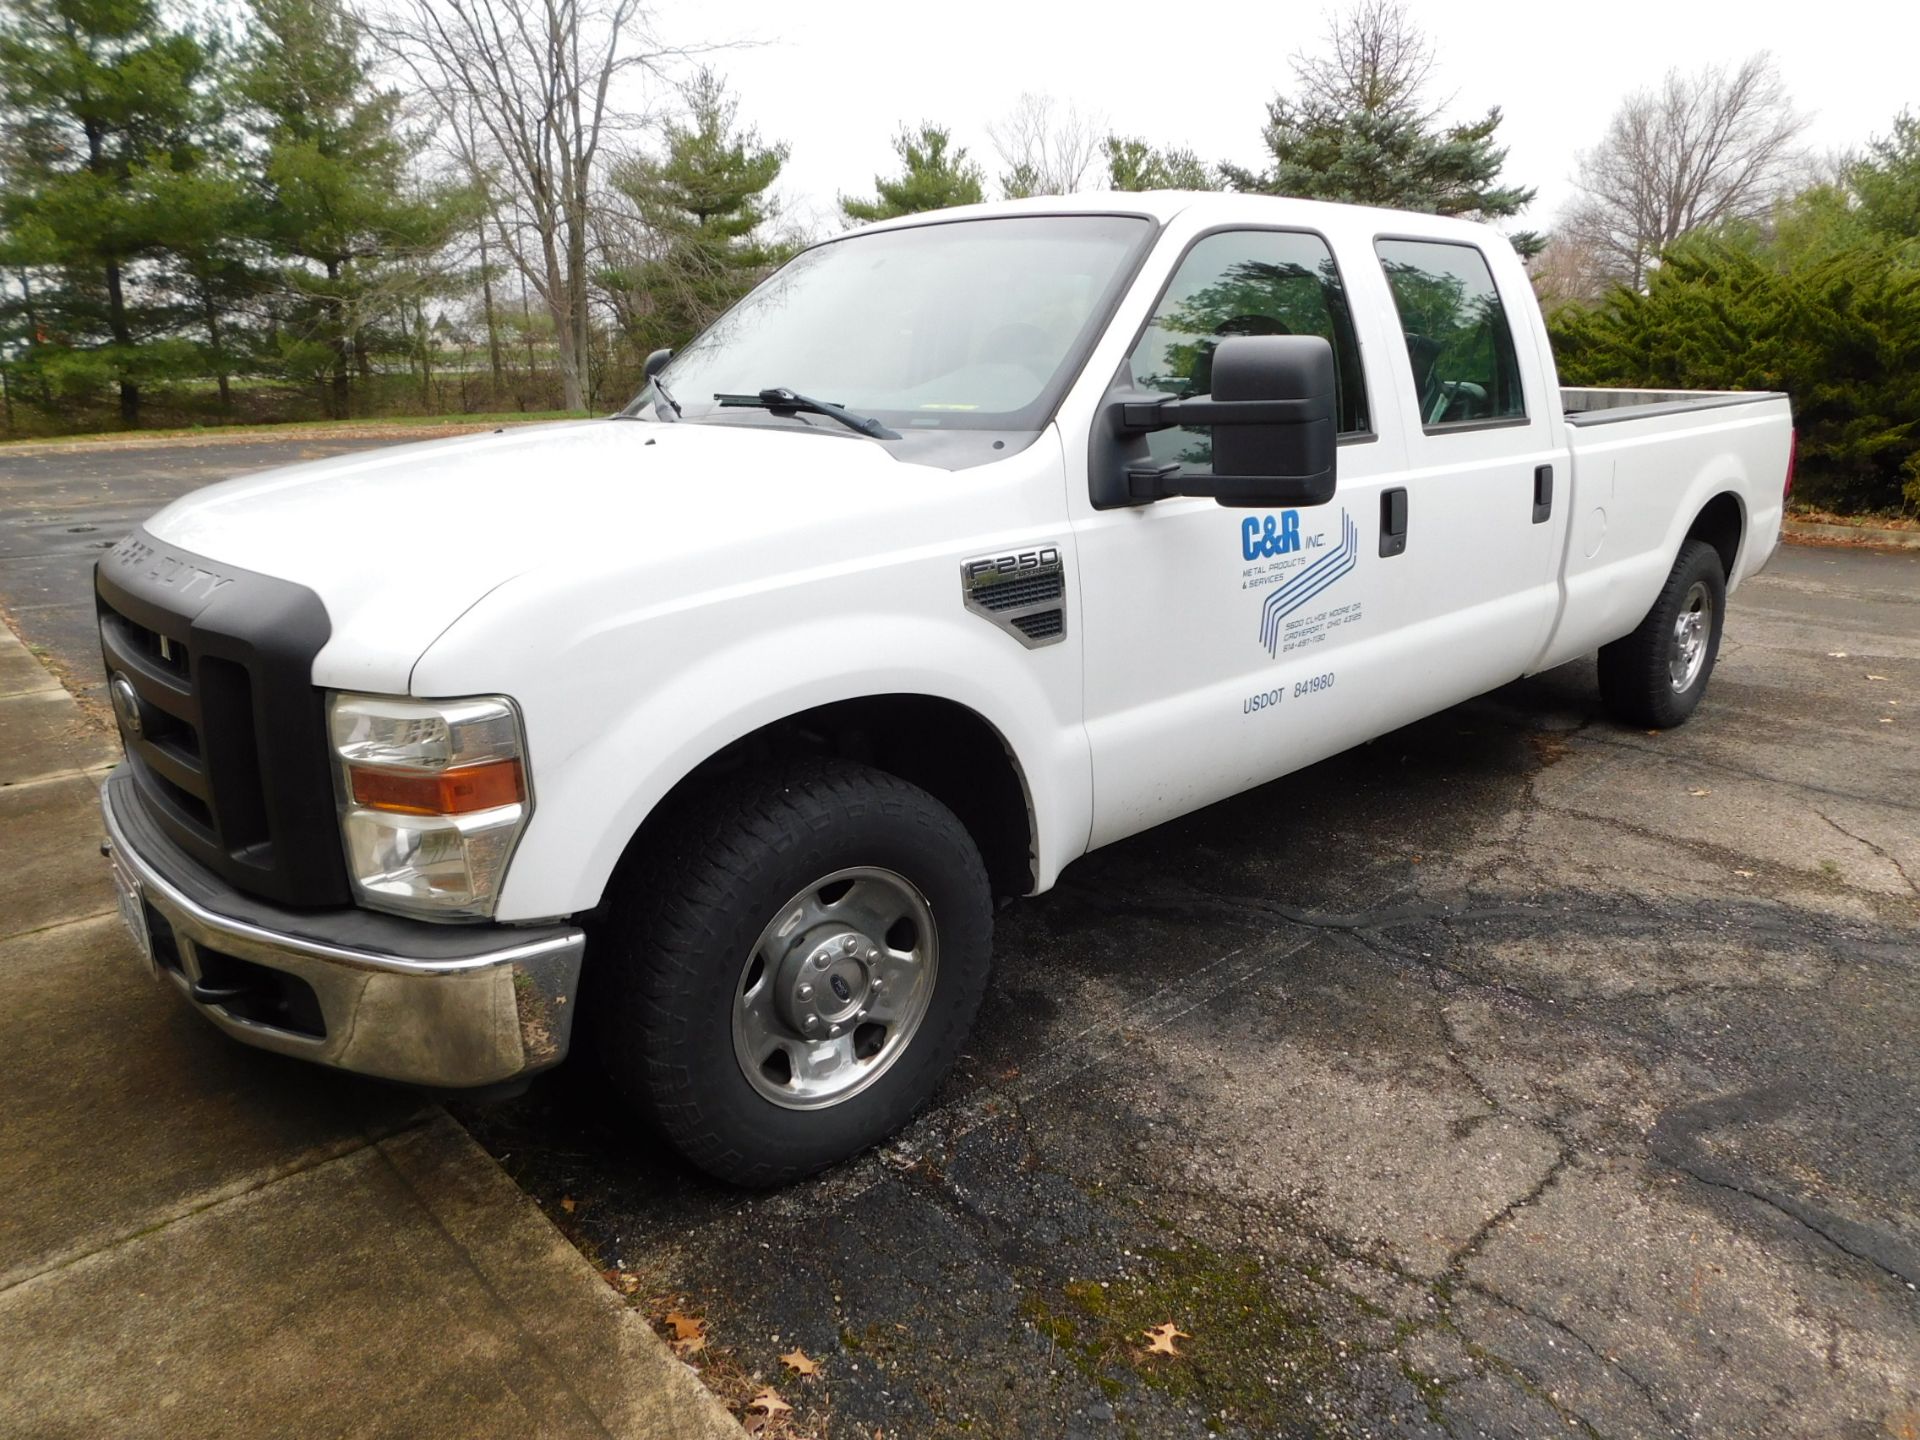 2008 Ford F250XL Super Duty Pick Up Truck, VIN 1FTSW20548EB51209, Crew Cab, Automatic, 8' Bed, 190,